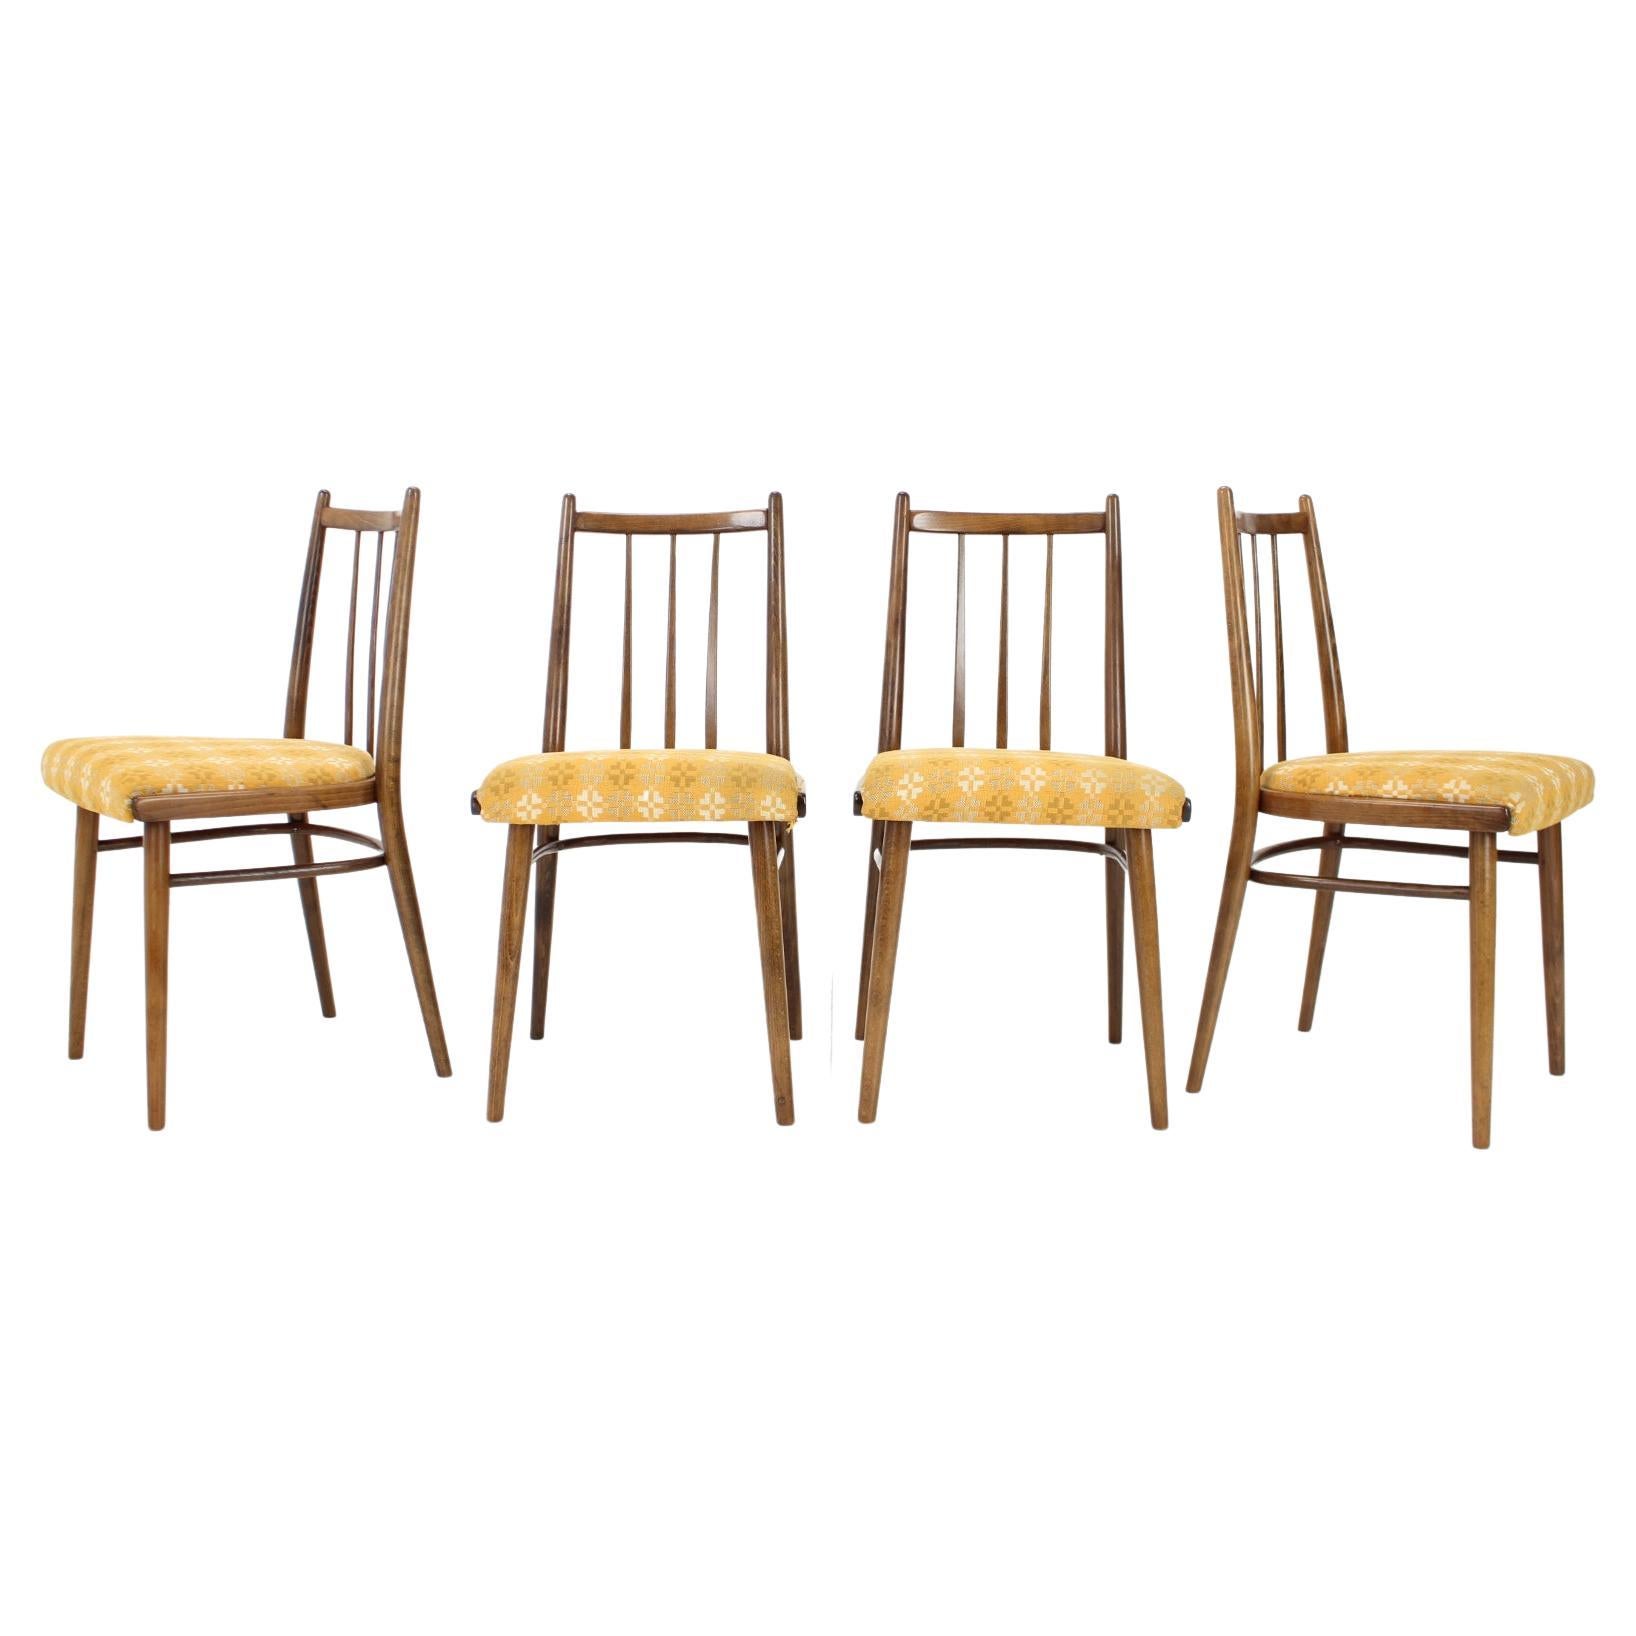 1970s Set of Four Dining Chairs by Jitona, Czechoslovakia For Sale